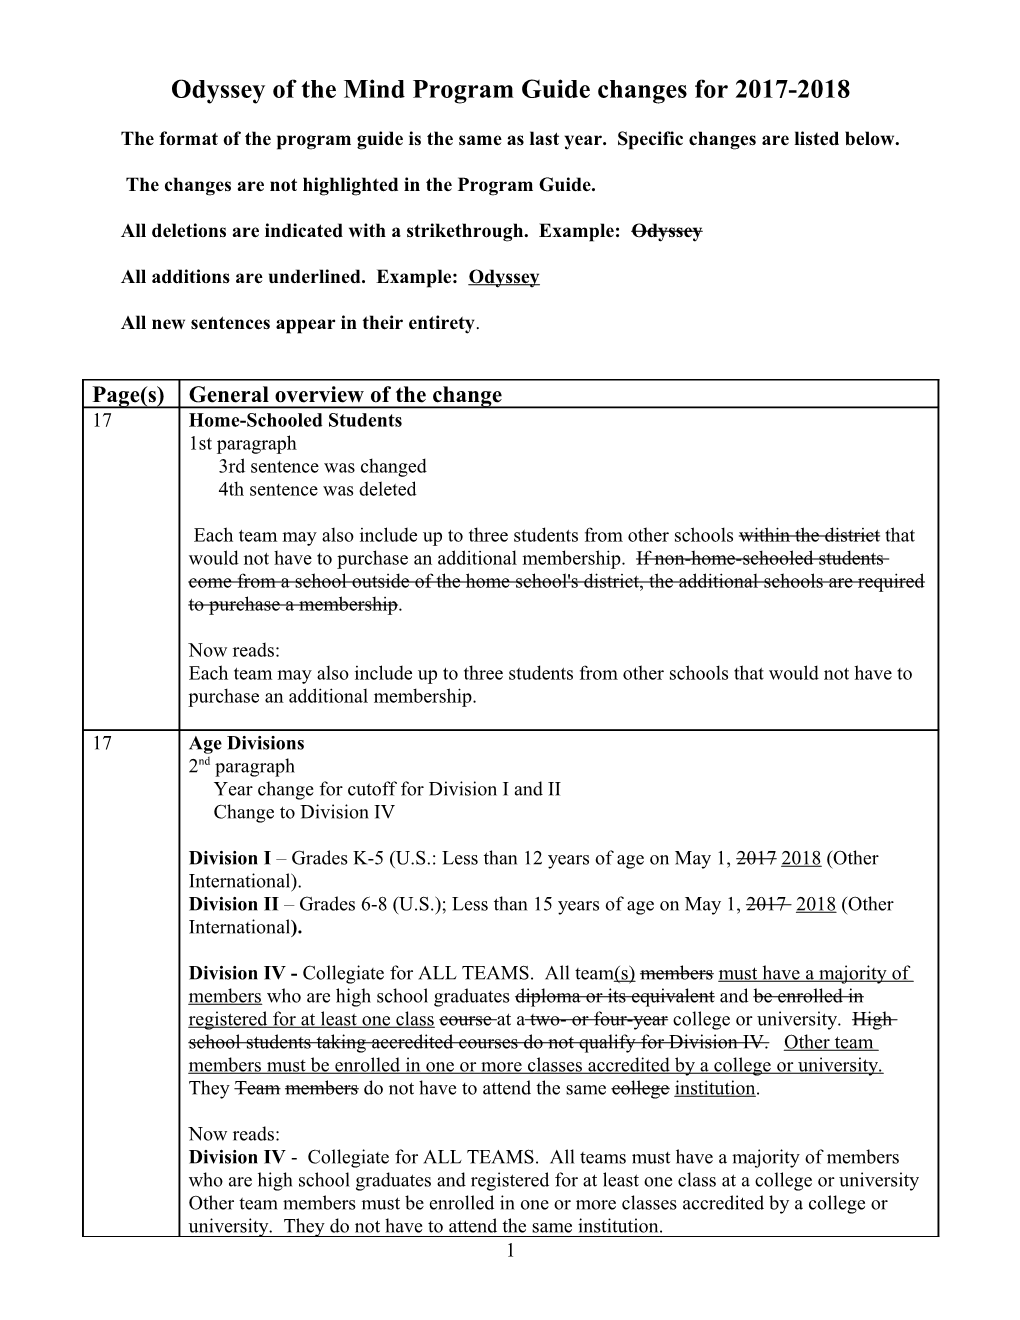 Odyssey of the Mind Program Guide Changes for 2007-2008